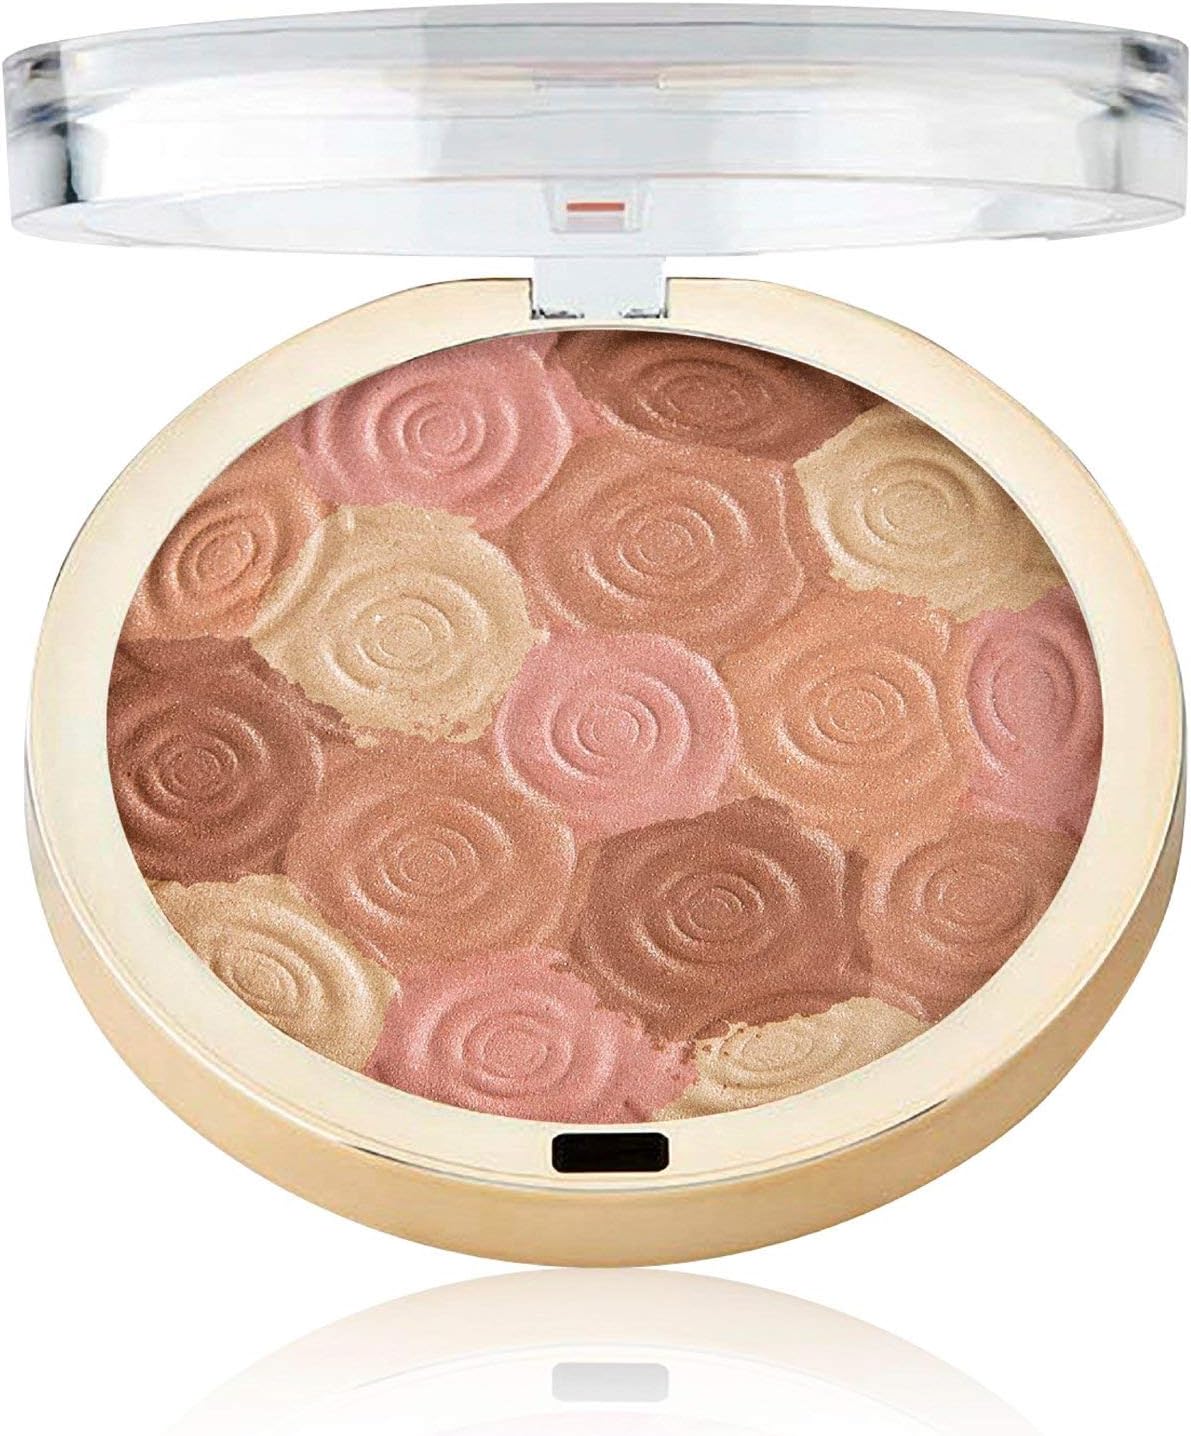 Milani Illuminating Face Powder - Hermosa Rose (0.35 Ounce) Cruelty-Free Highlighter, Blush & Bronzer in One Compact to Shape, Contour & Highlight